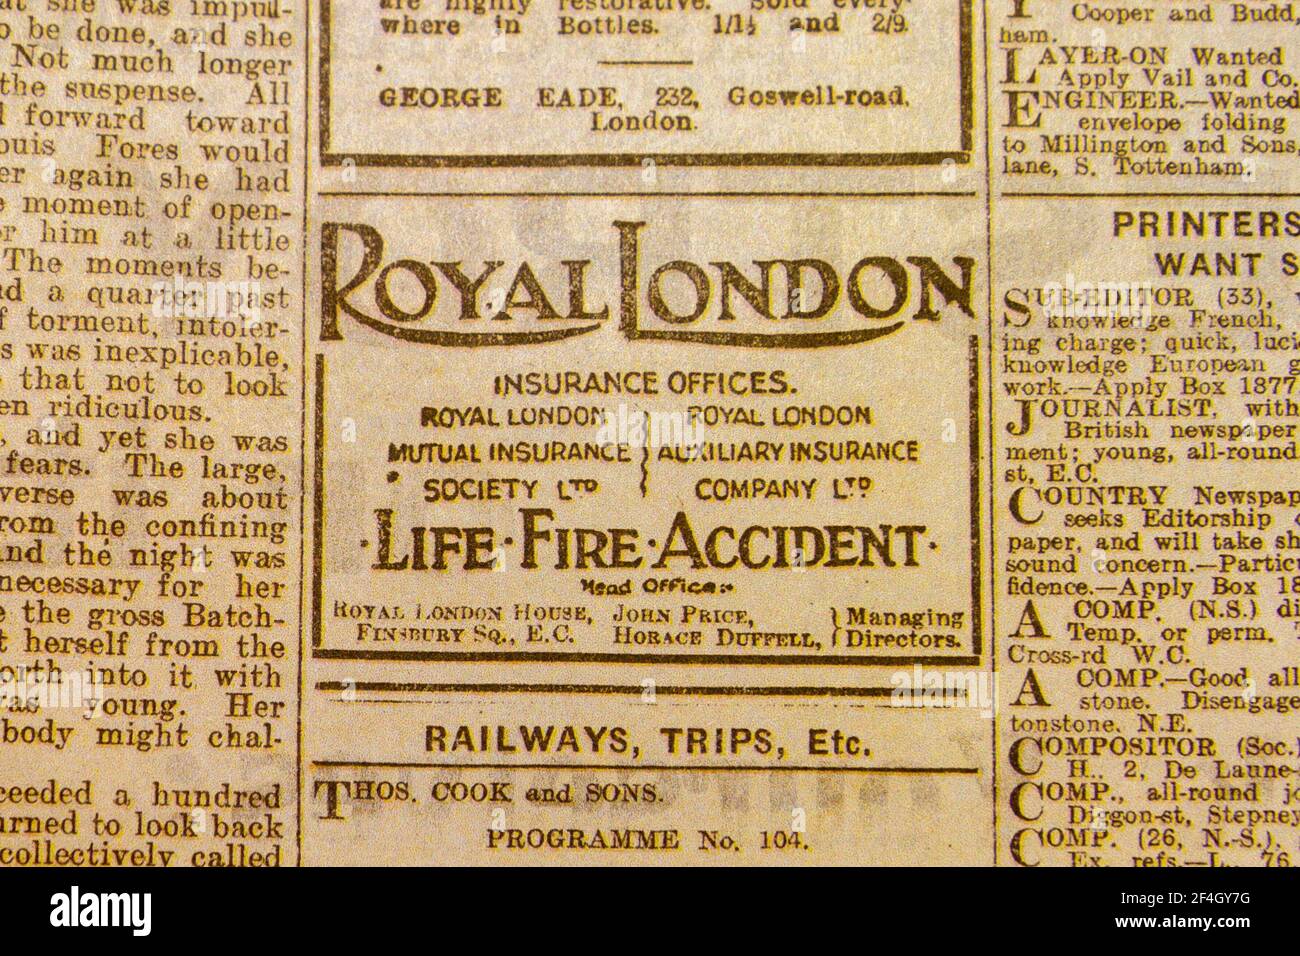 Advert for Royal London insurance in the Daily News & Reader newspaper on 5th Aug 1914. Stock Photo